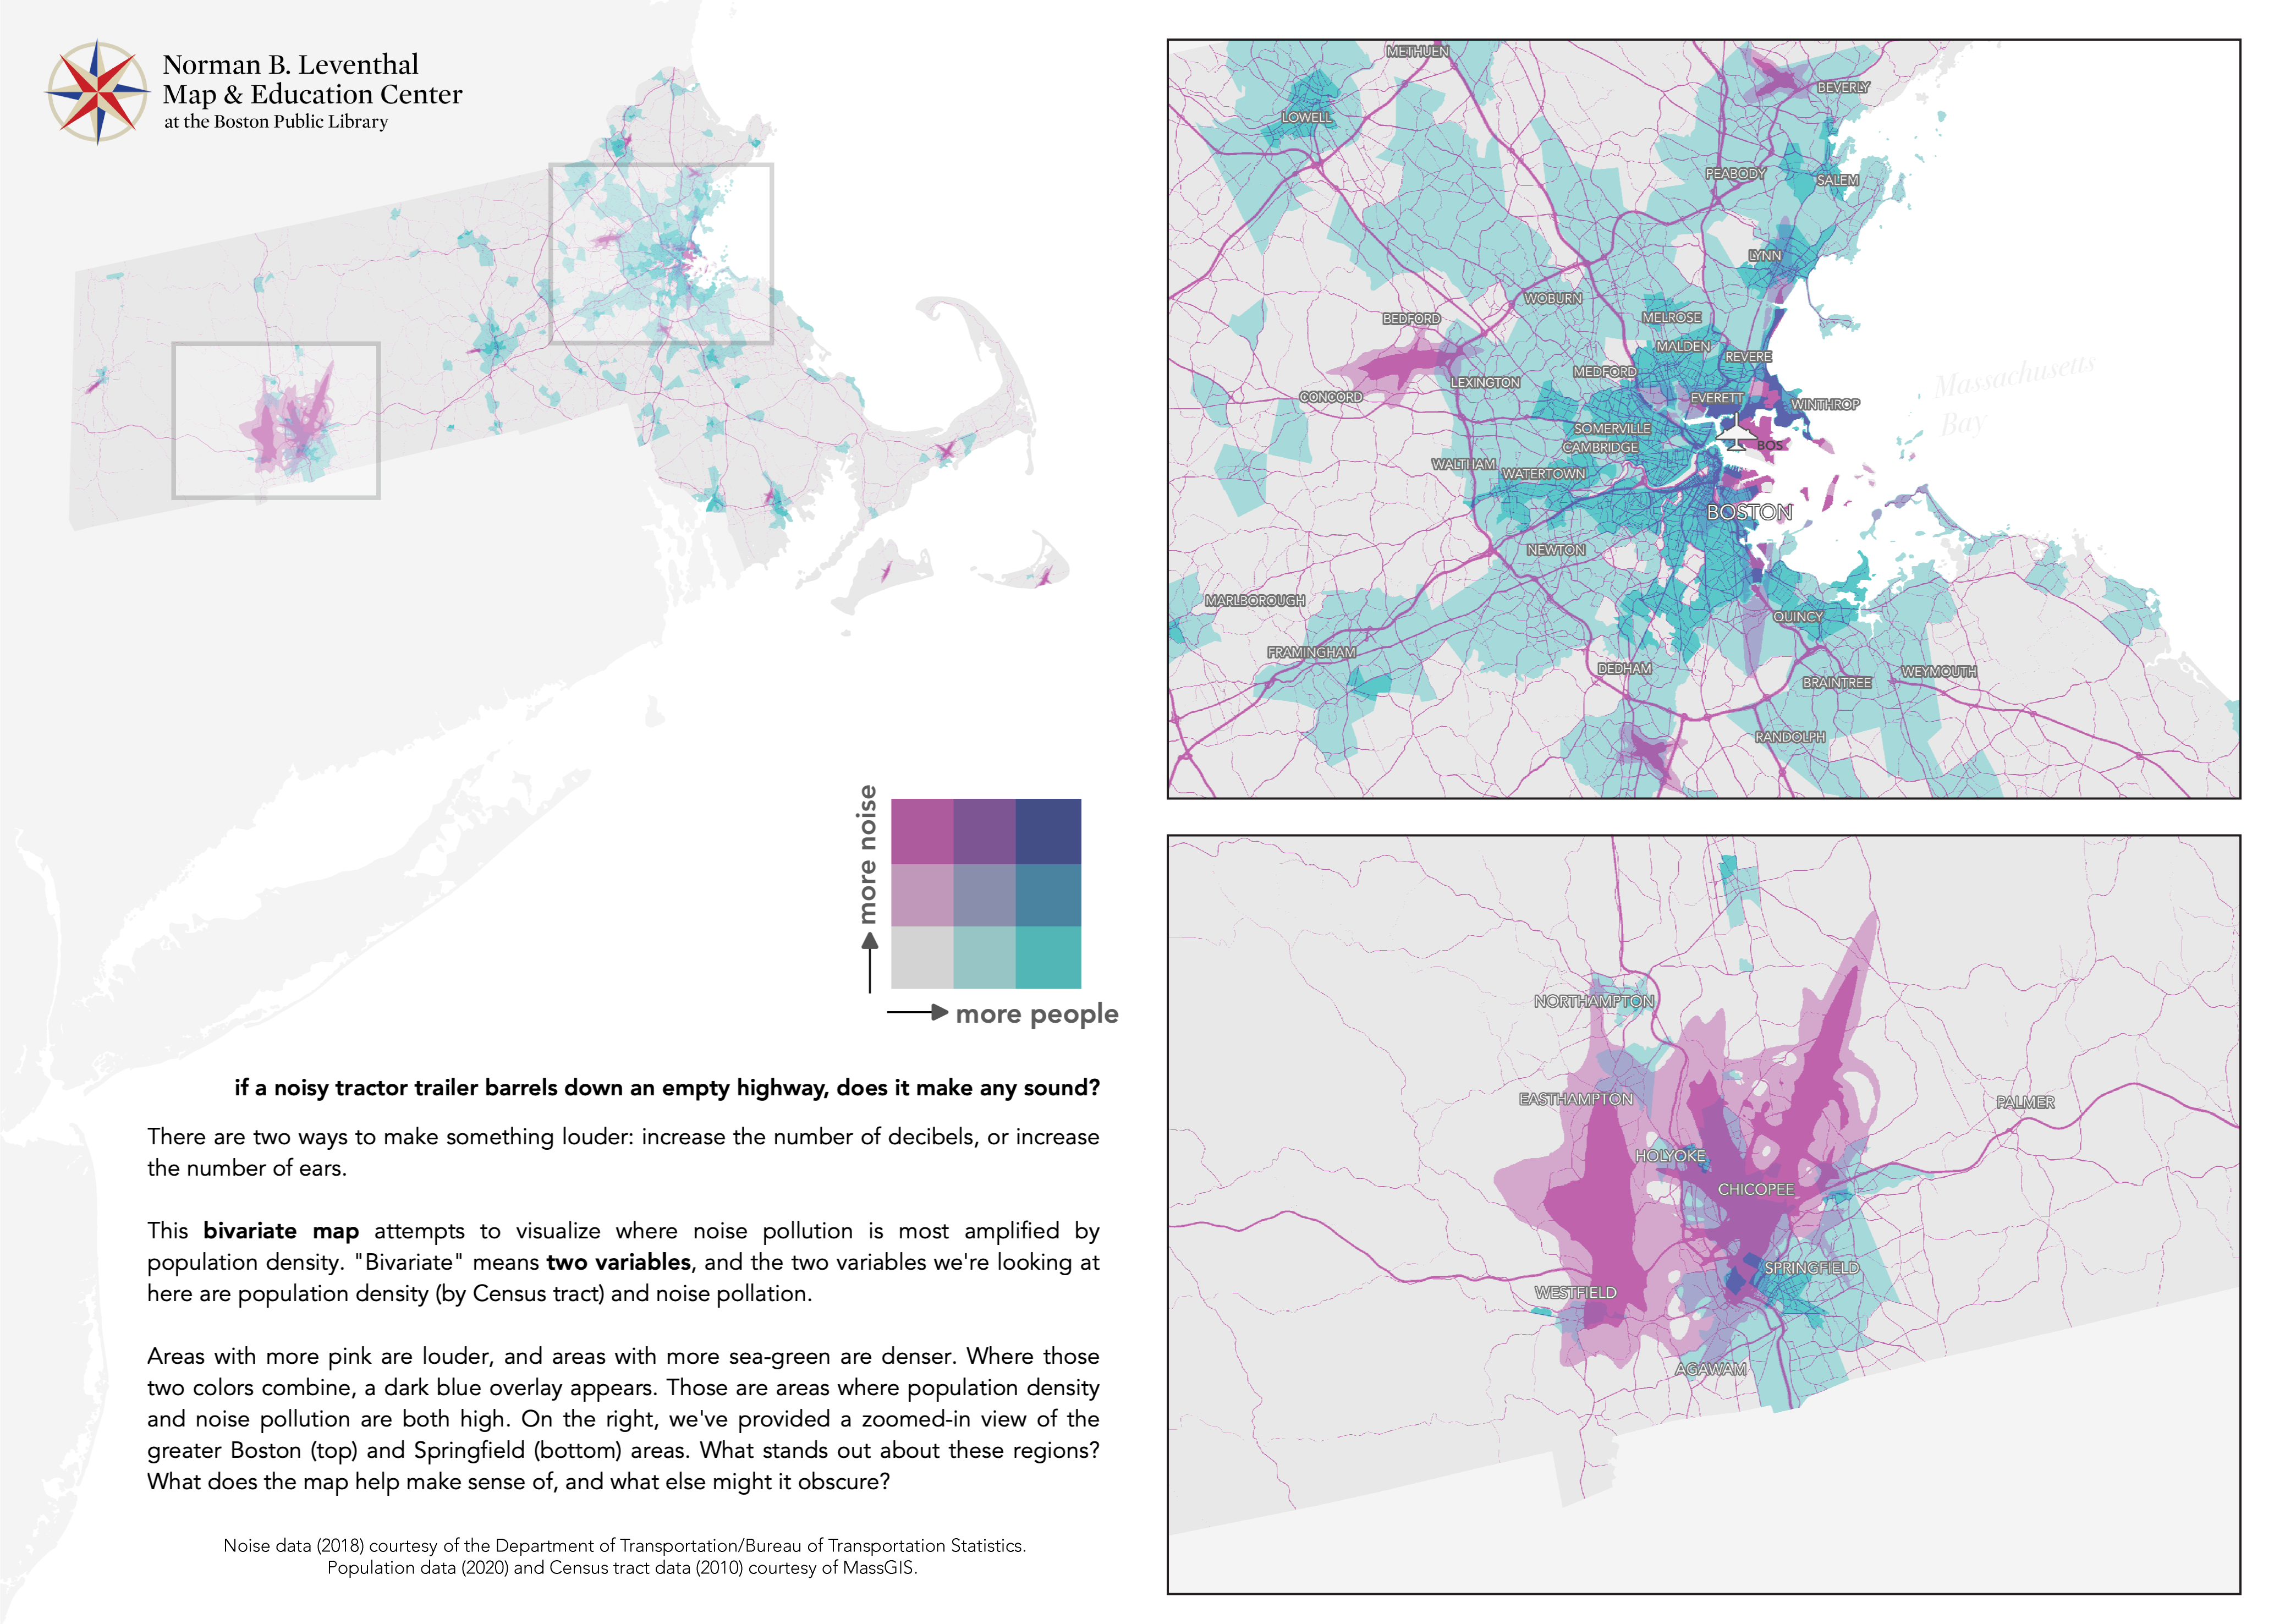 Our bivariate noise map for Massachussetts, taking population into account.